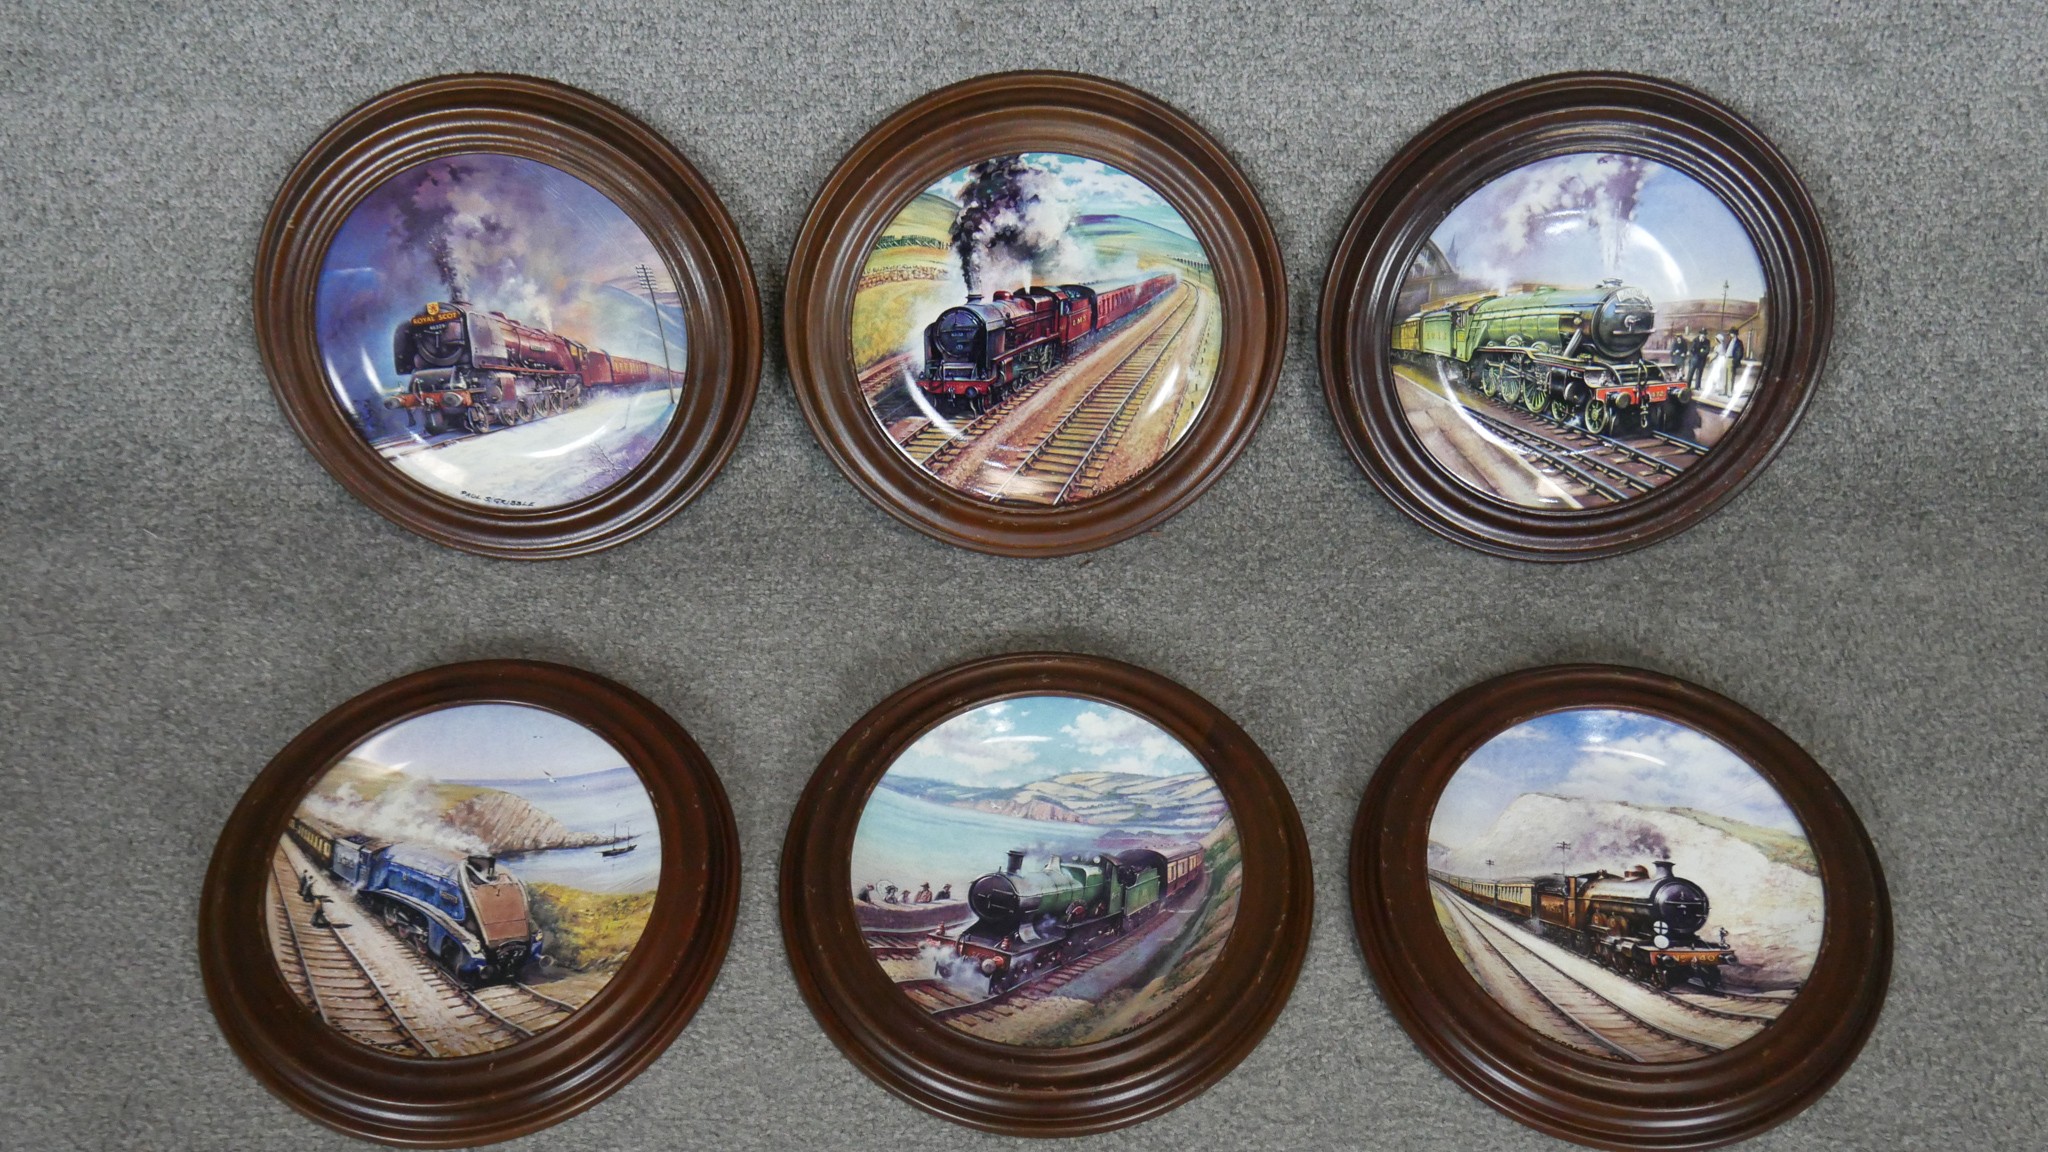 Six wooden framed limited edition Davenport transfer design ceramic plates by Paul Gribble from